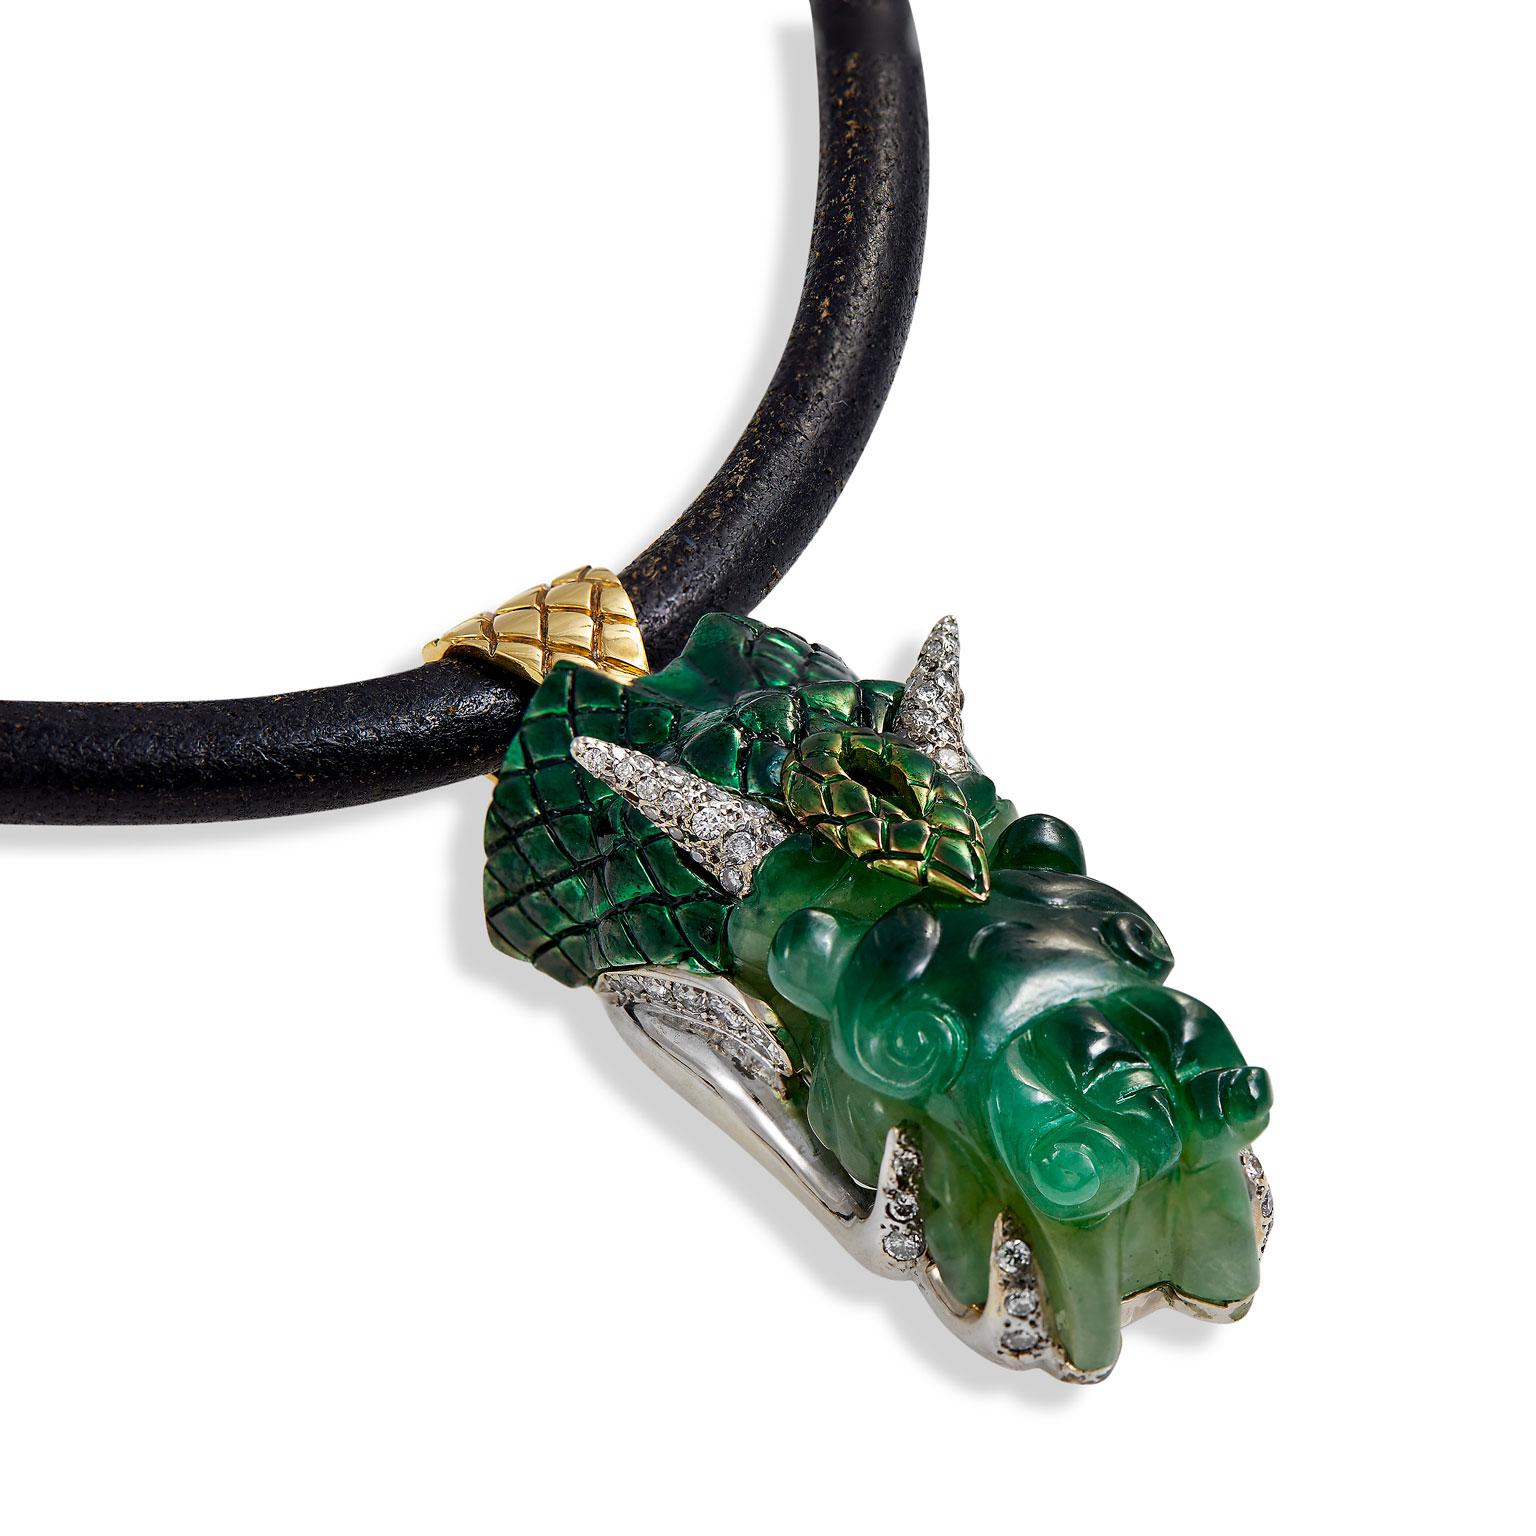 Contemporary Green Jade Dragon Jadeite and Diamond One of a Kind Men's Pendant Necklace For Sale